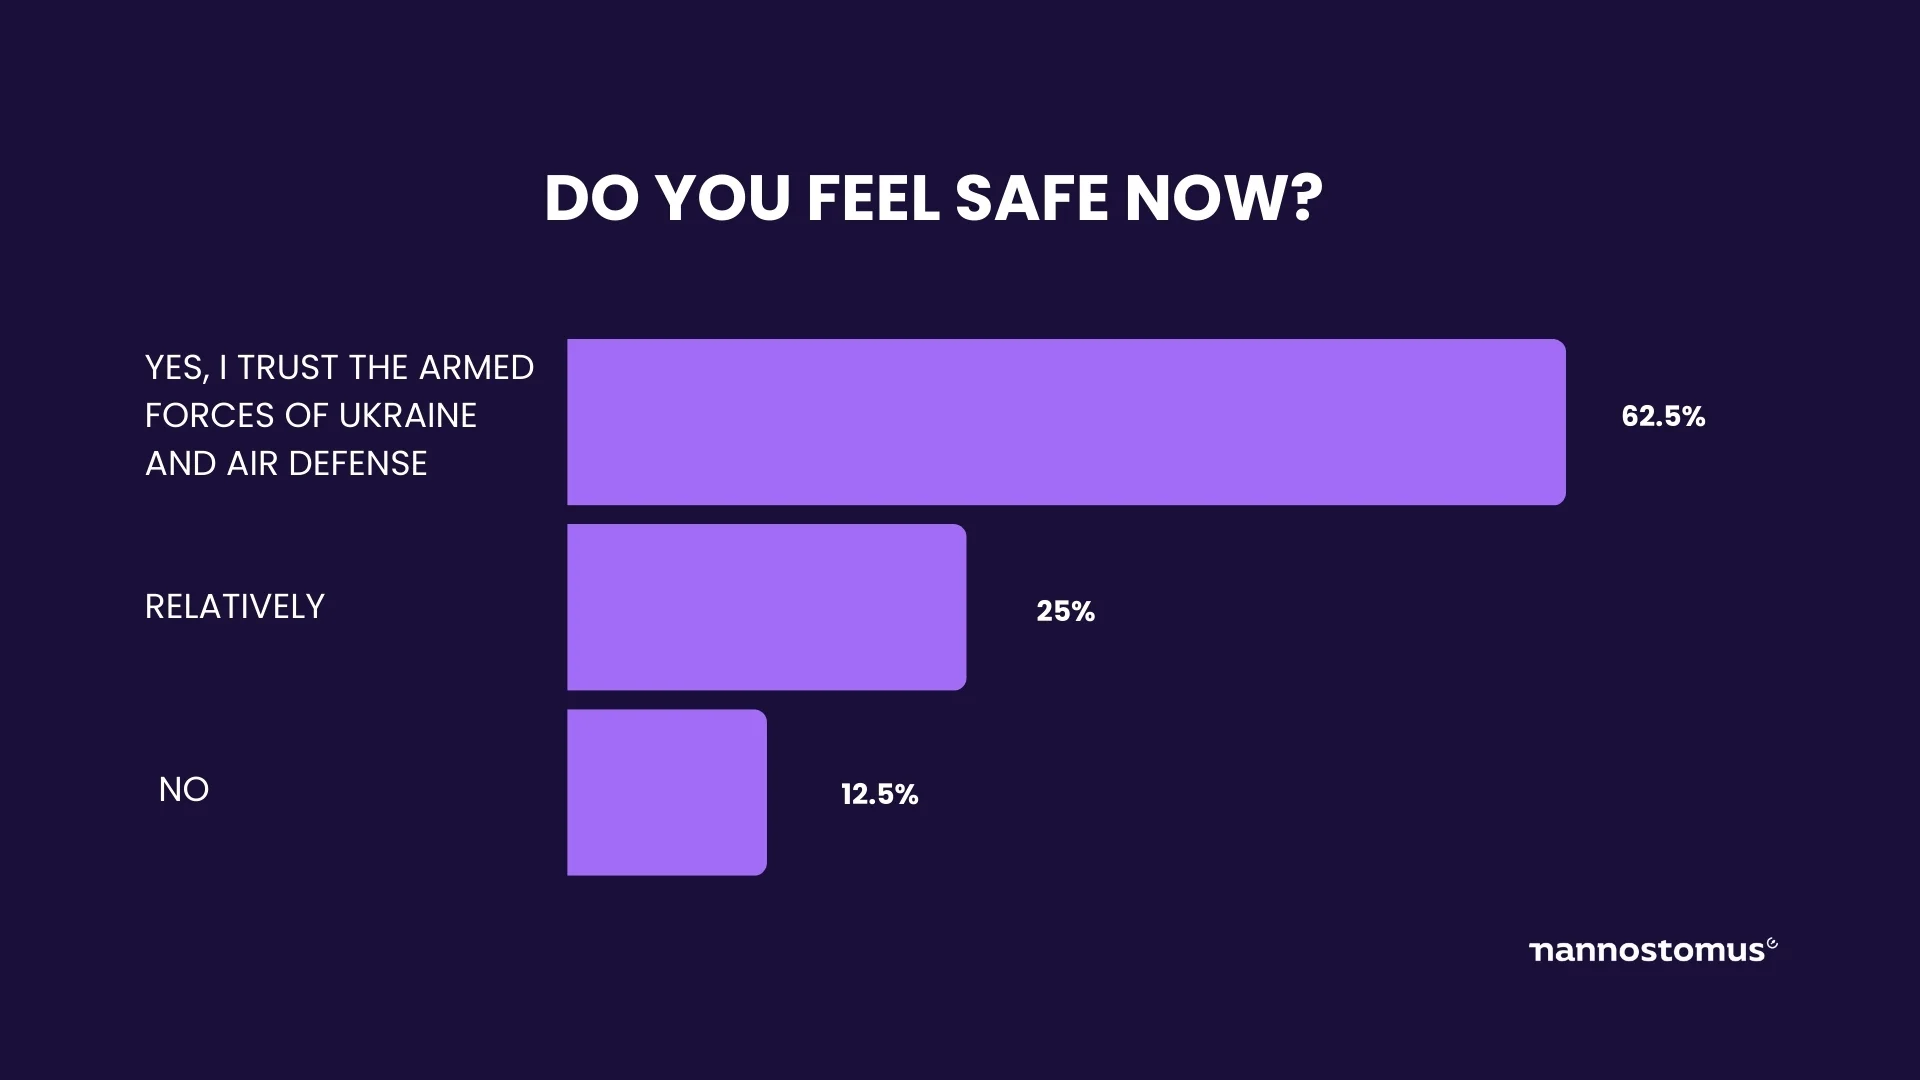 The survey about whether Nannostomus employees feel safe